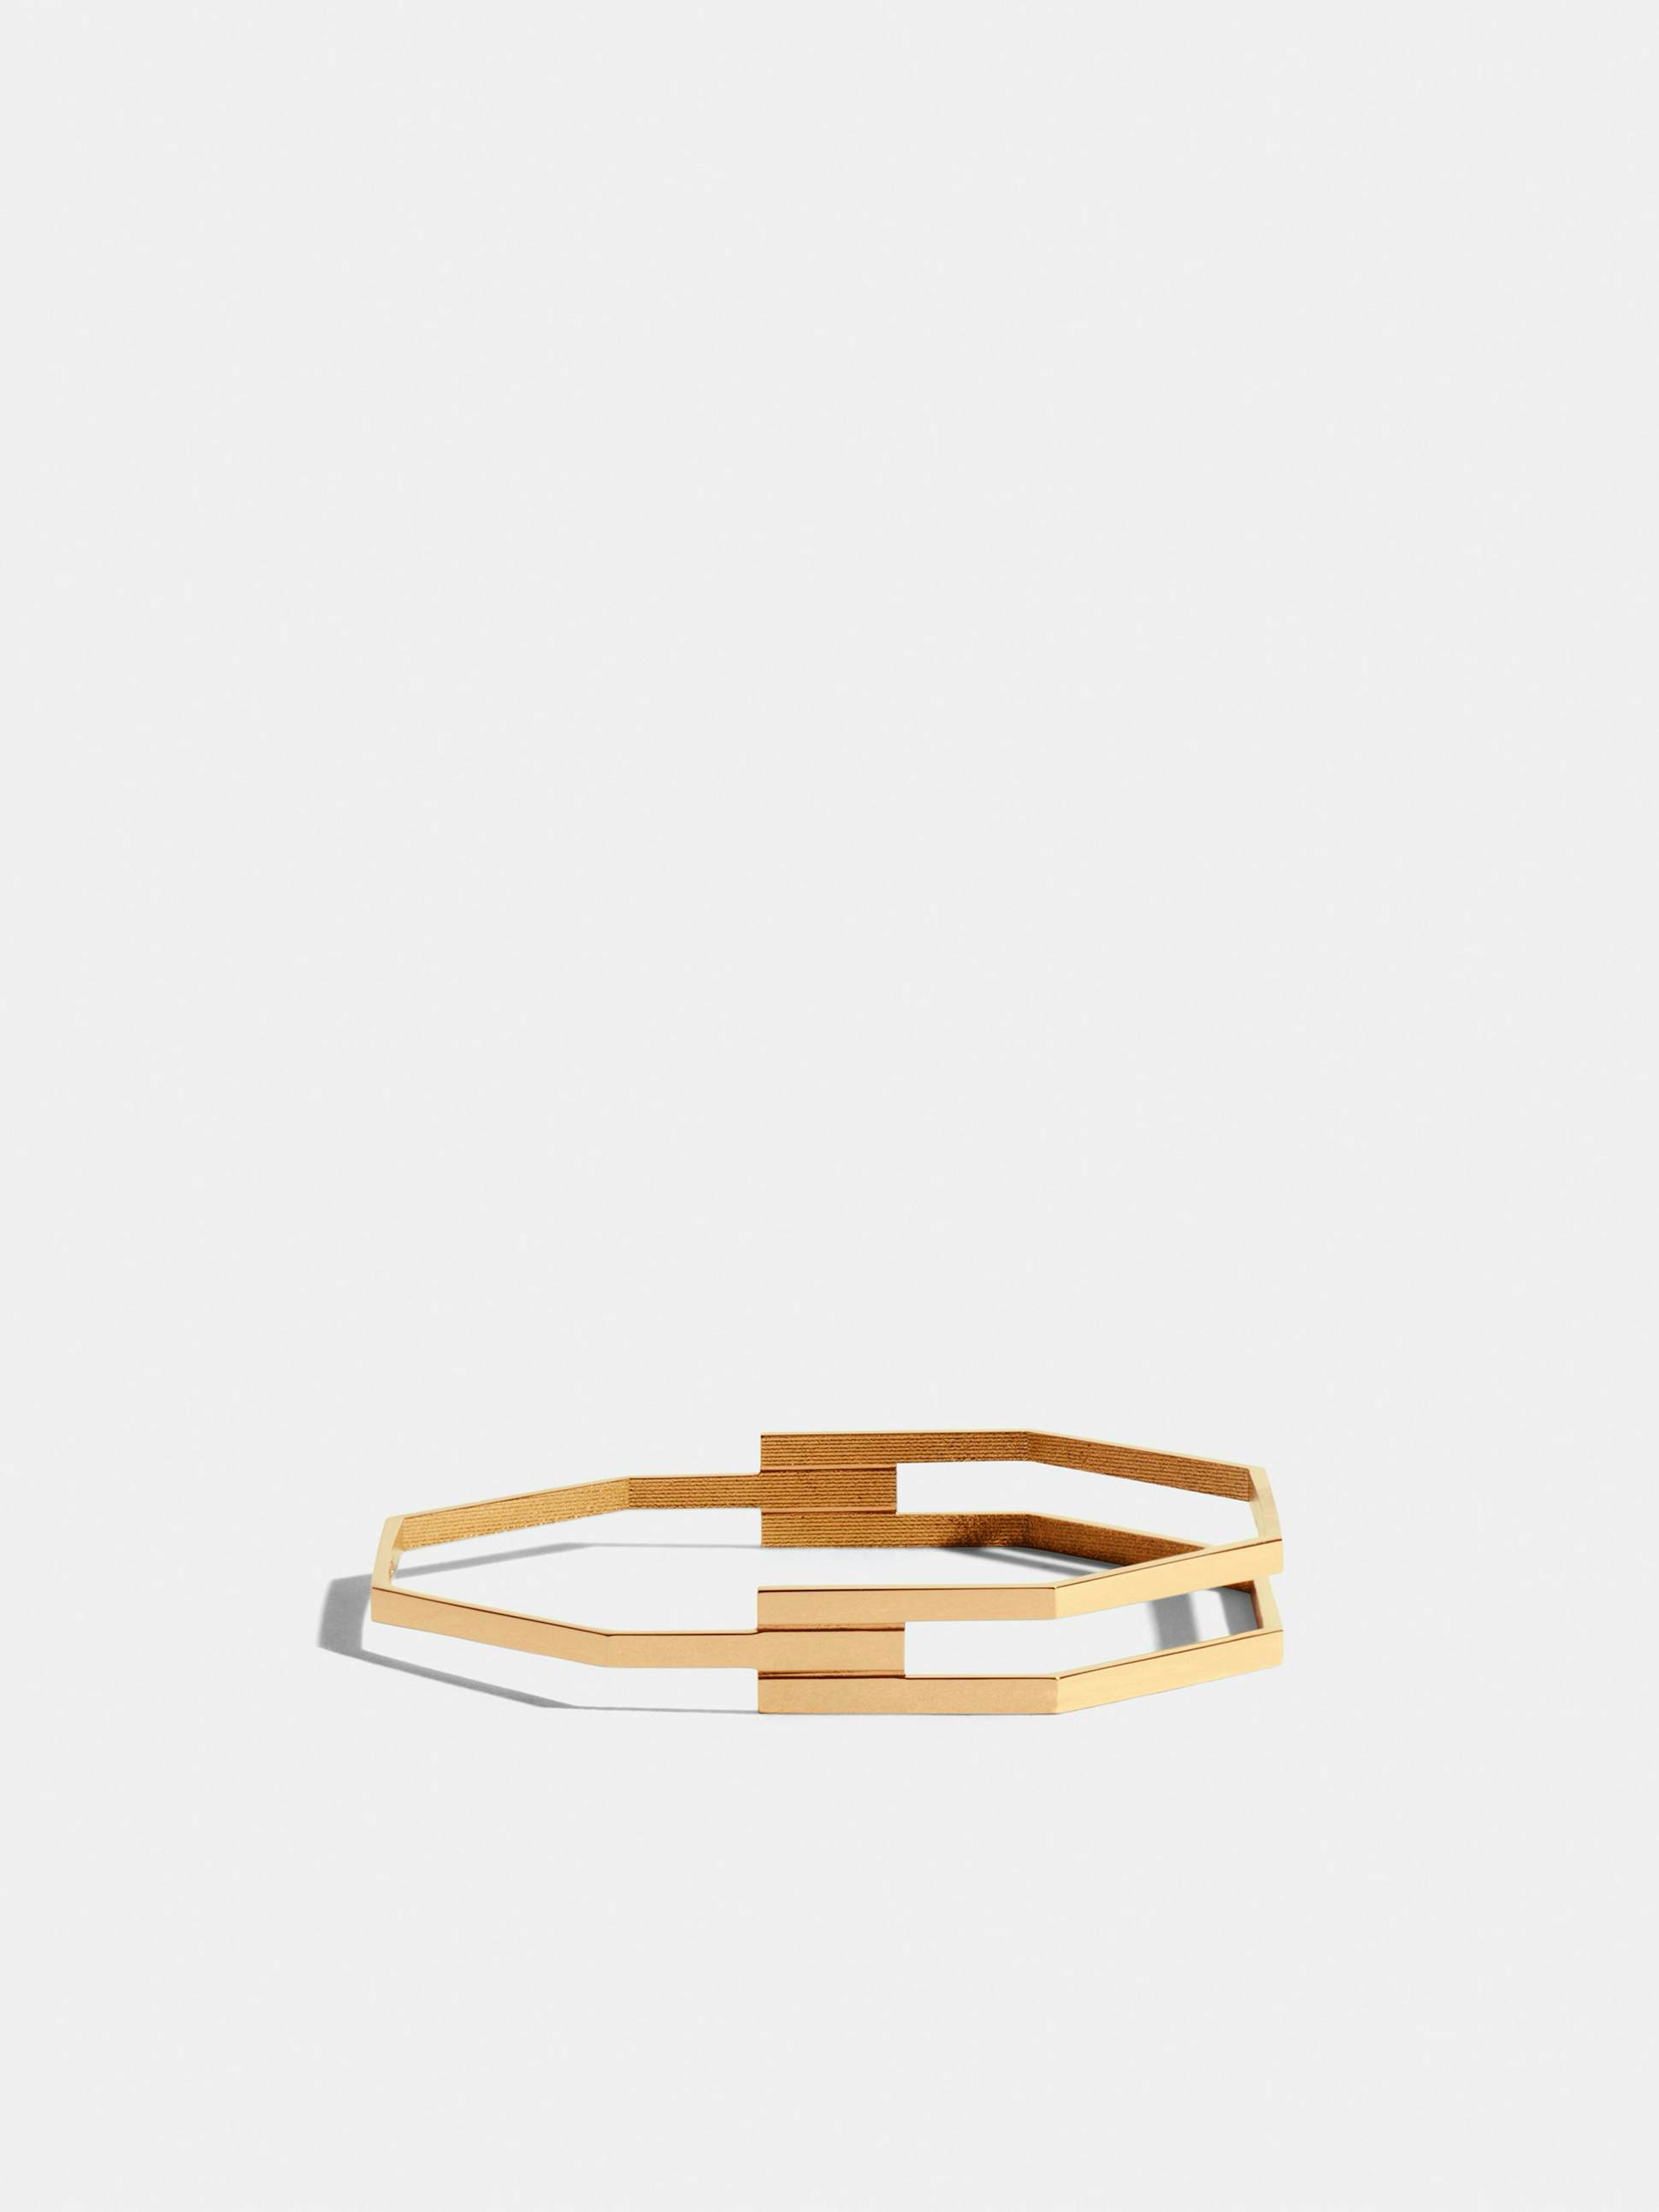 Octogone triple bangle in 18k Fairmined ethical yellow gold